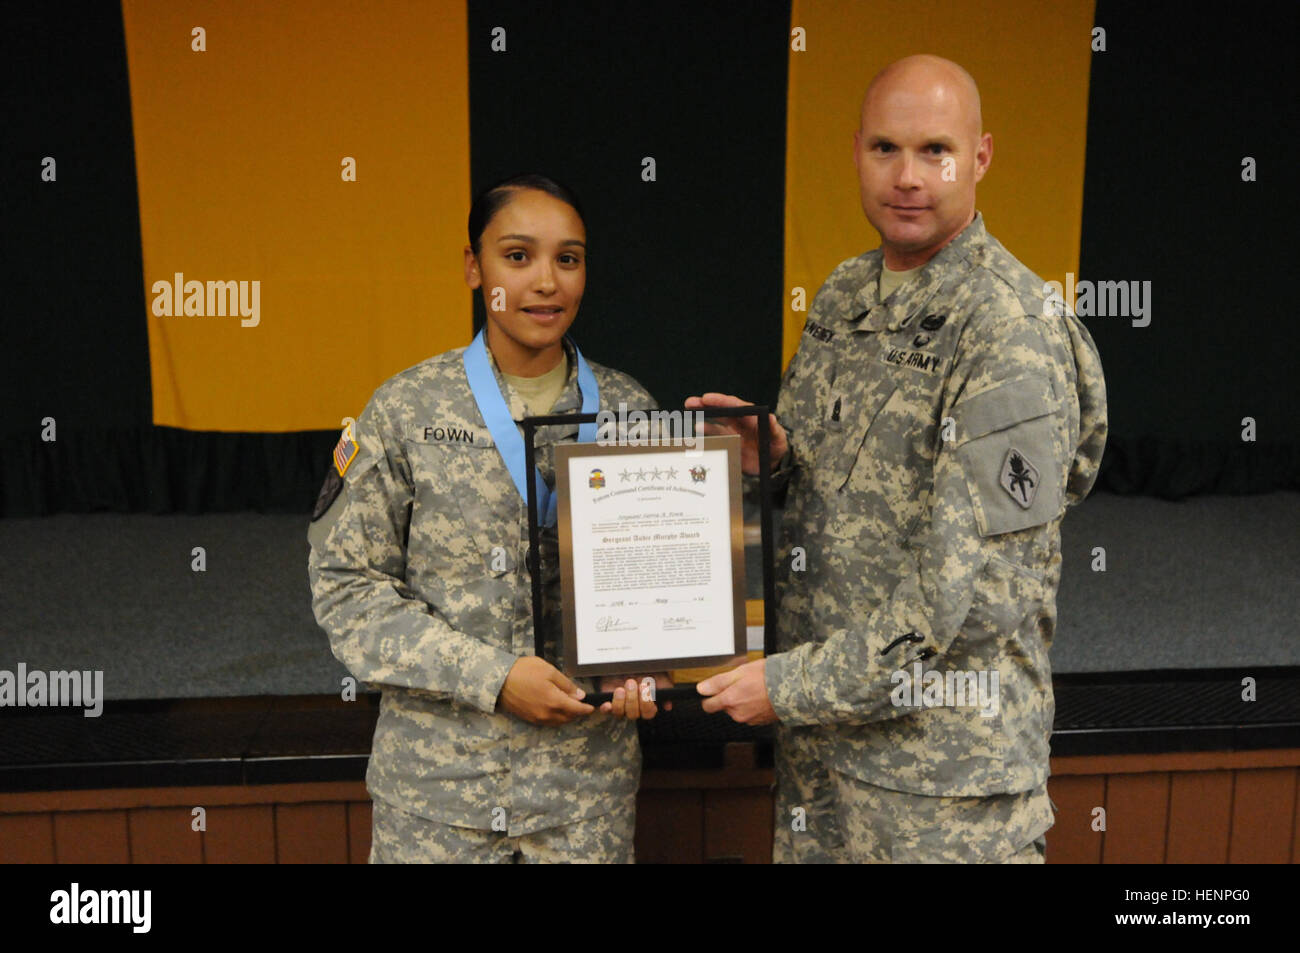 Command Sgt. Maj. John McNeirney, Military Police Regimental and U.S. Army Military Police School, hands Sgt. Sierra Fown, military police officer, 110th MP Company, 759th MP Battalion, her certificate for being inducted into the Sgt. Audie Murphy Club at Fort Carson, Colo., Aug. 21, 2014. (U.S. Army photo by Sgt. Eric Glassey, 4th Infantry Division PAO) MP CSM visits Fort Carson 140821-A-RY828-648 Stock Photo